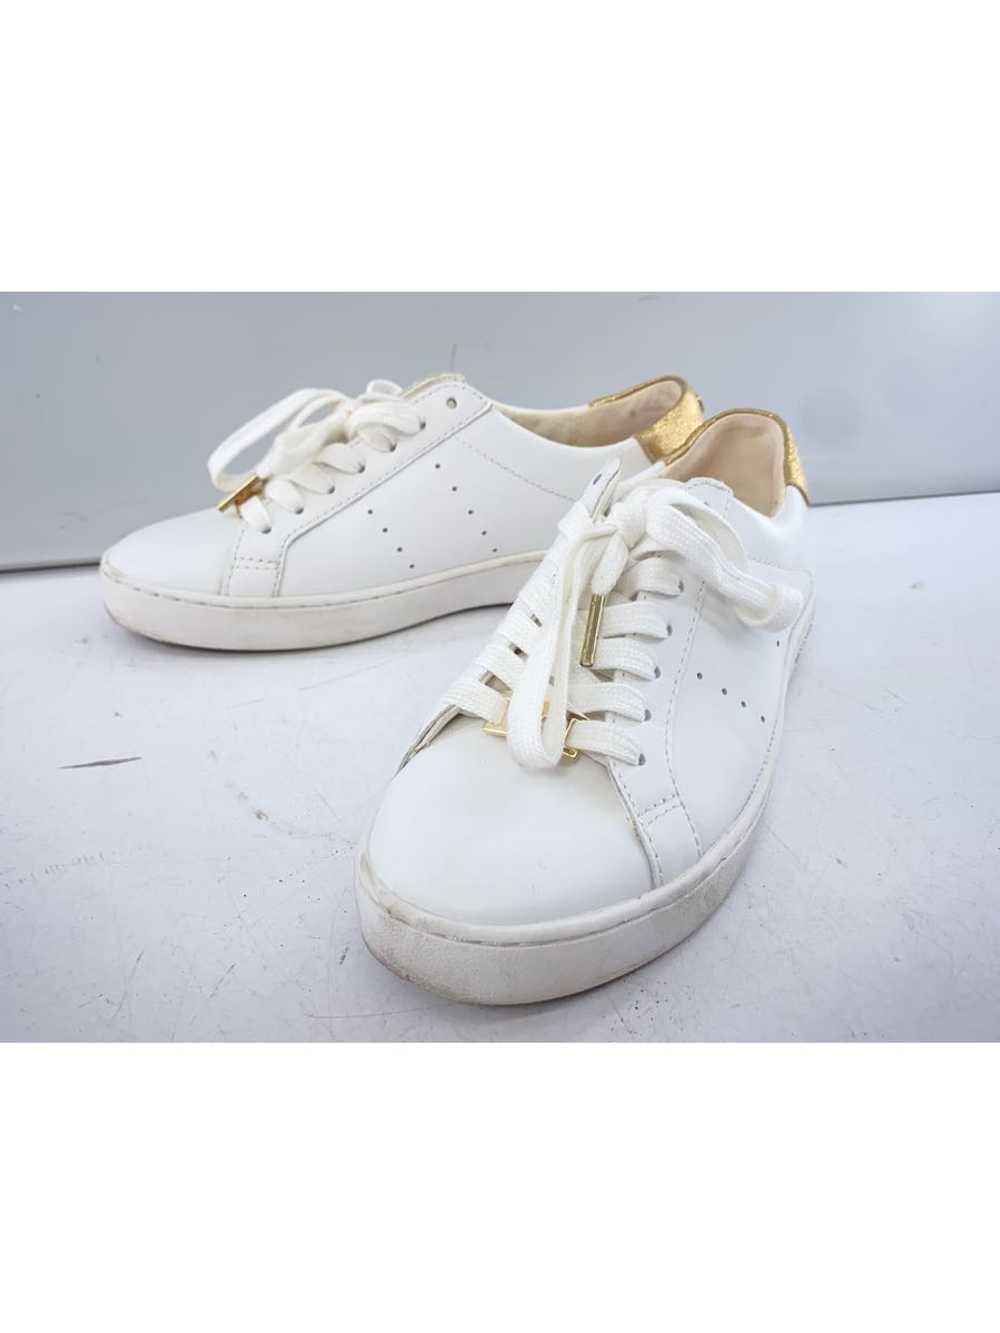 Michael Kors Low Cut Sneakers/36/White/Leather/Hx… - image 2